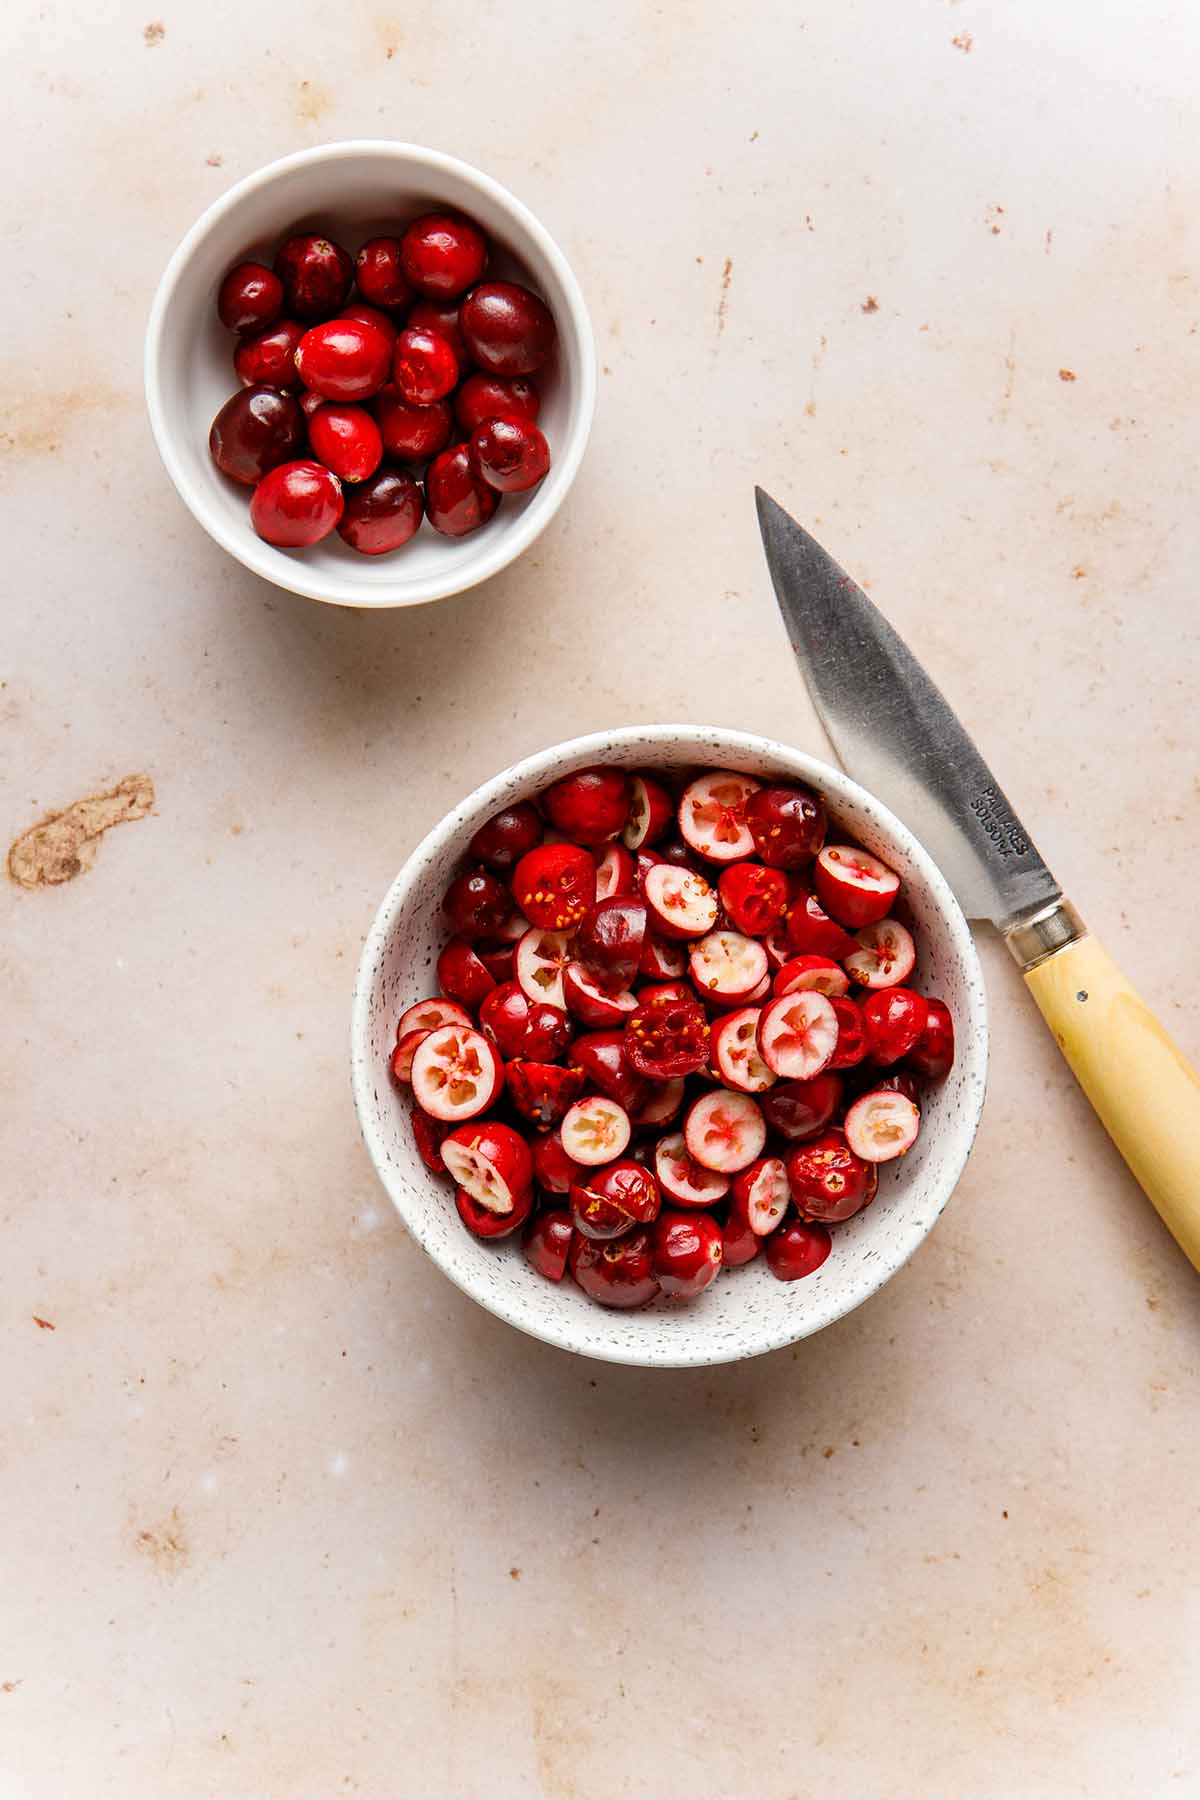 A small bowl of halved cranberries next to a knife and a smaller bowl of whole cranberries.